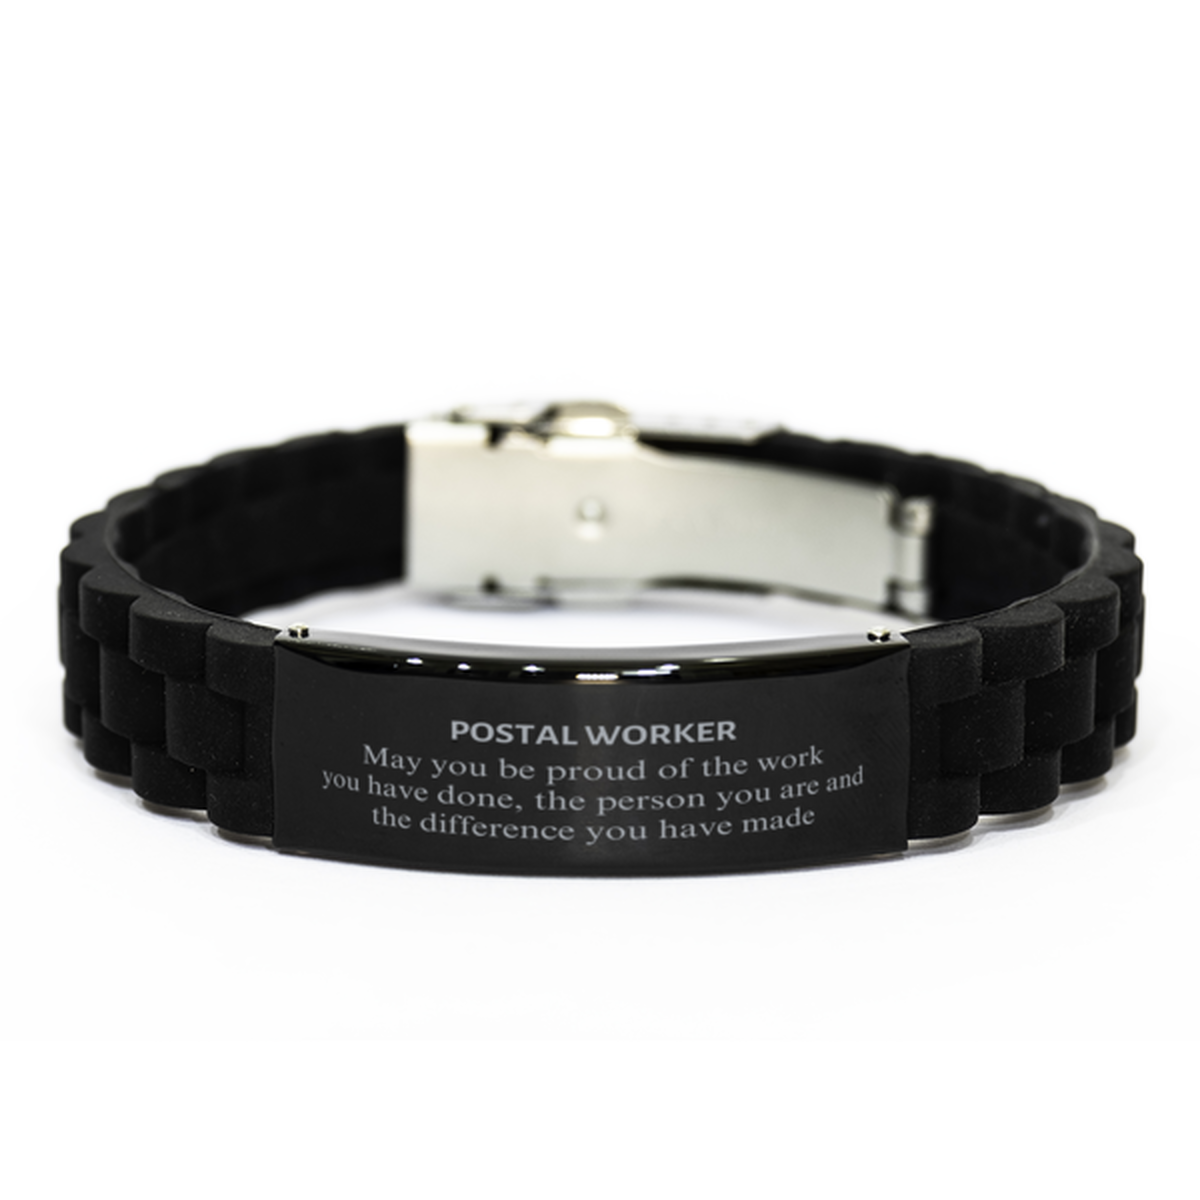 Postal Worker May you be proud of the work you have done, Retirement Postal Worker Black Glidelock Clasp Bracelet for Colleague Appreciation Gifts Amazing for Postal Worker